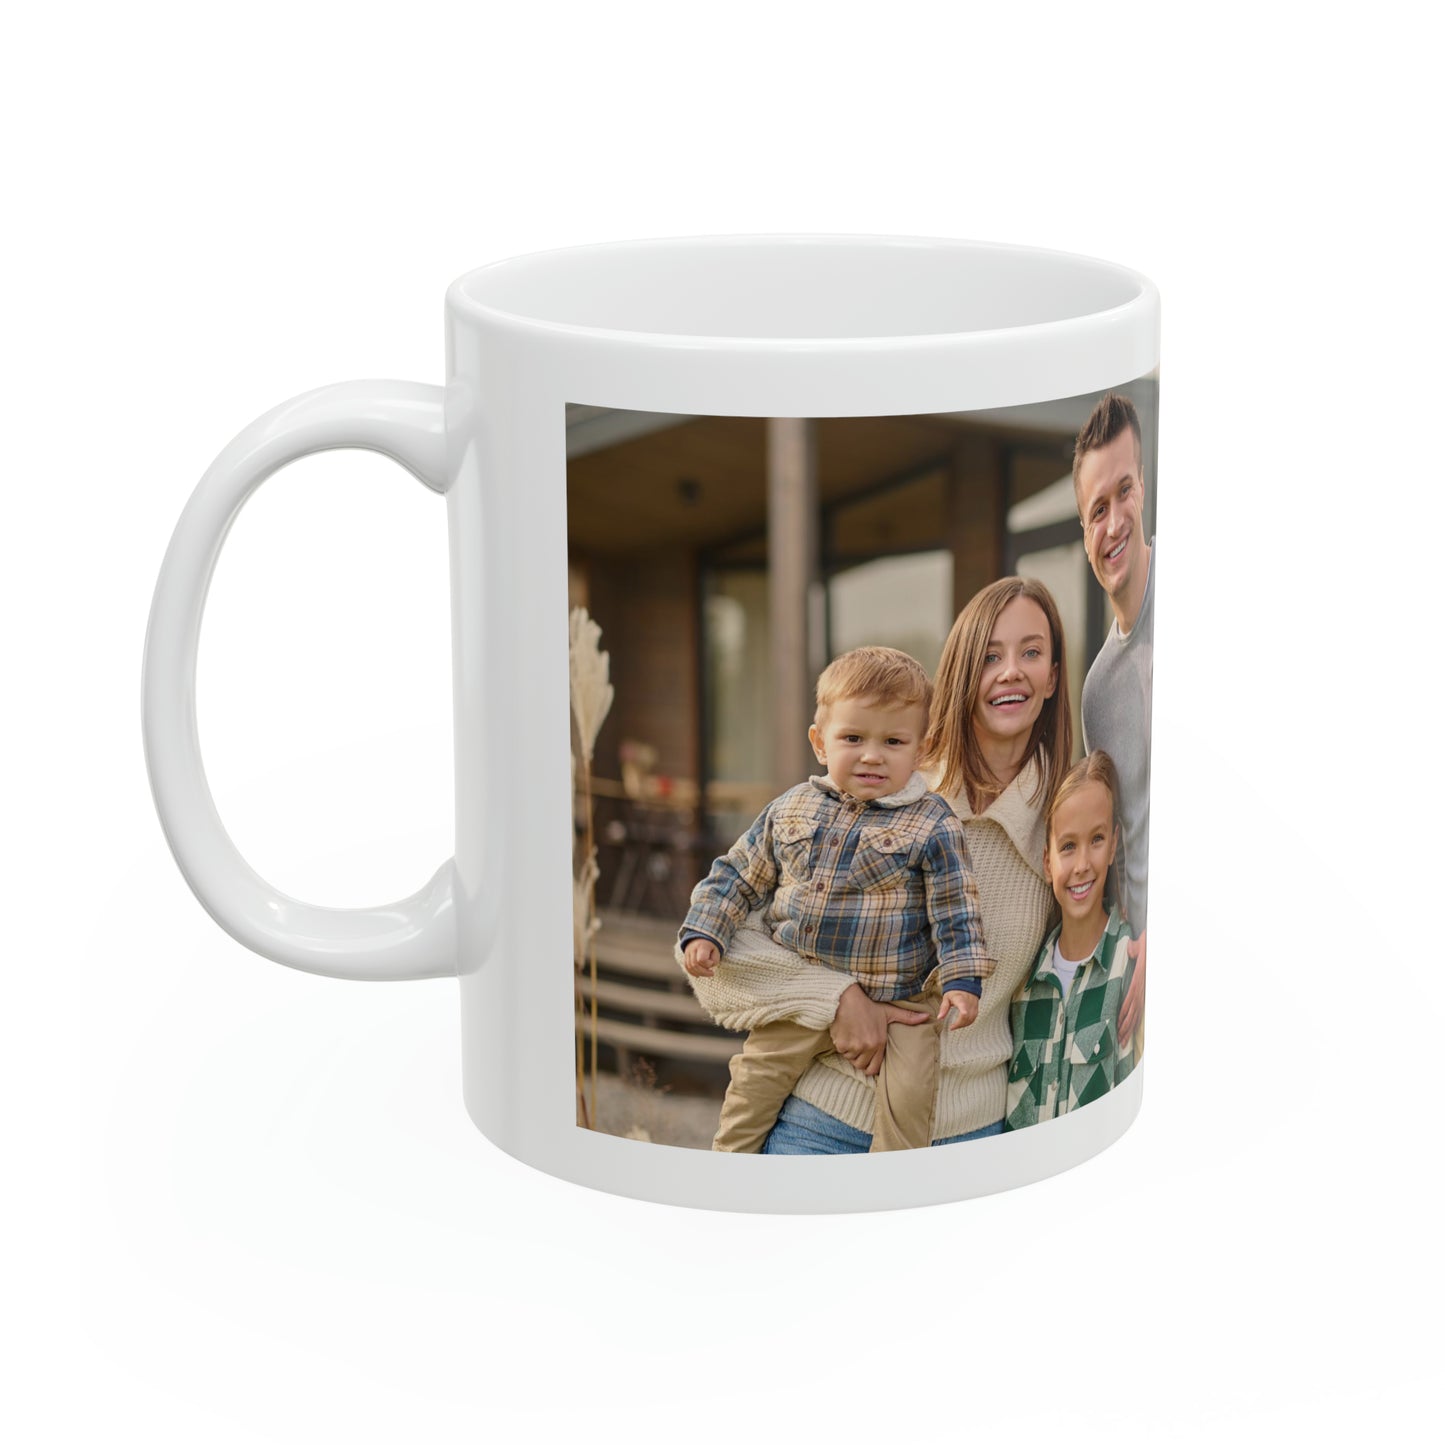 Memories Collection - Personalized Family Photo Collage Ceramic Mug,11oz